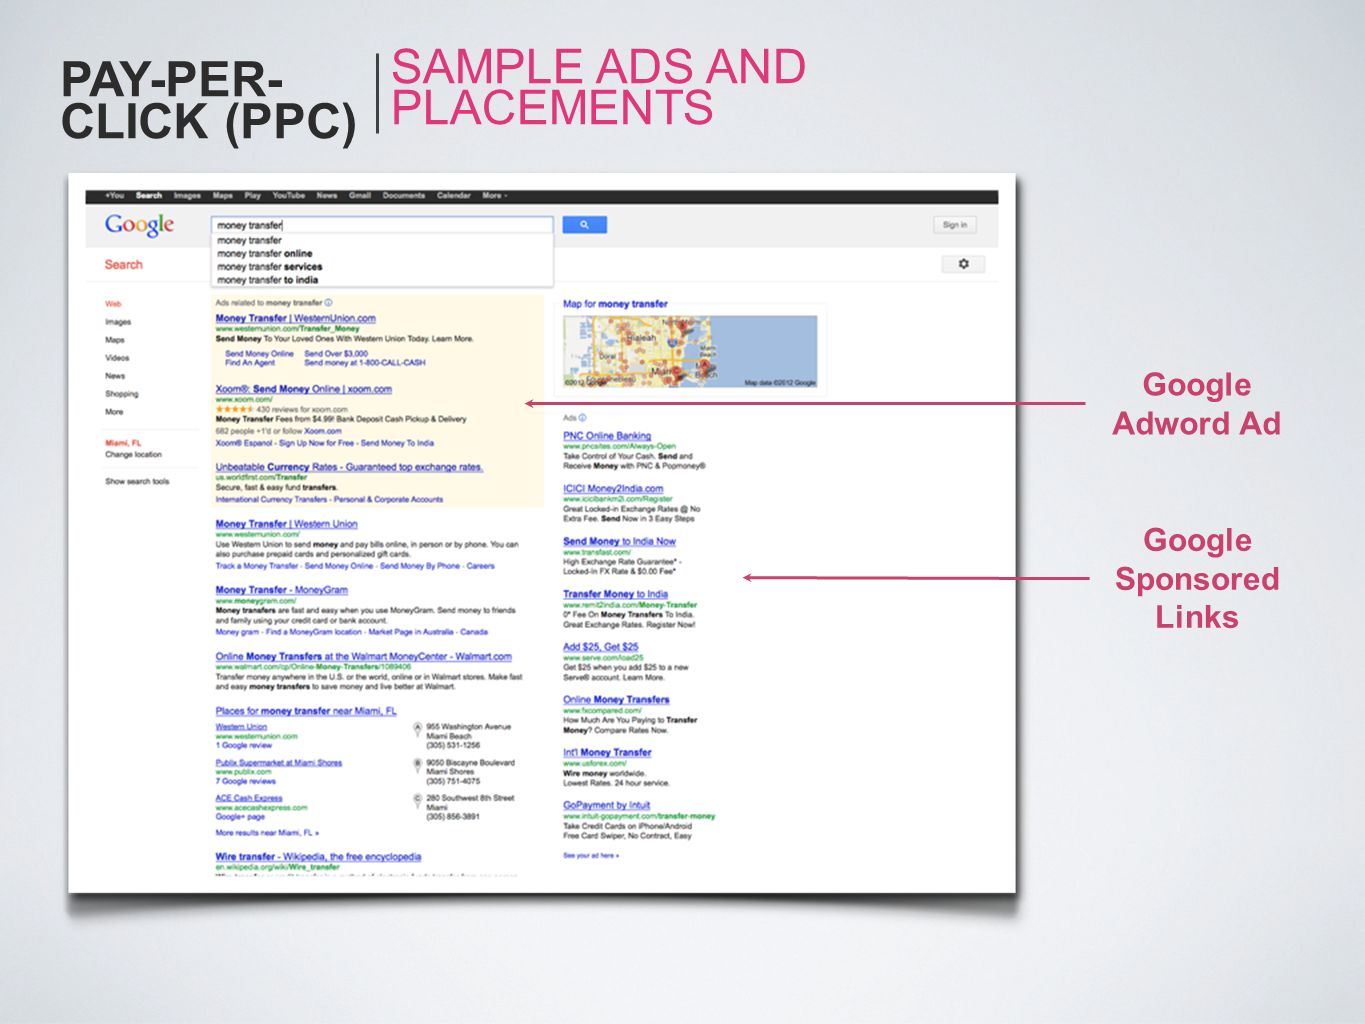 PAY-PER-CLICK (PPC) SAMPLE ADS AND PLACEMENTS Google Adword Ad Google